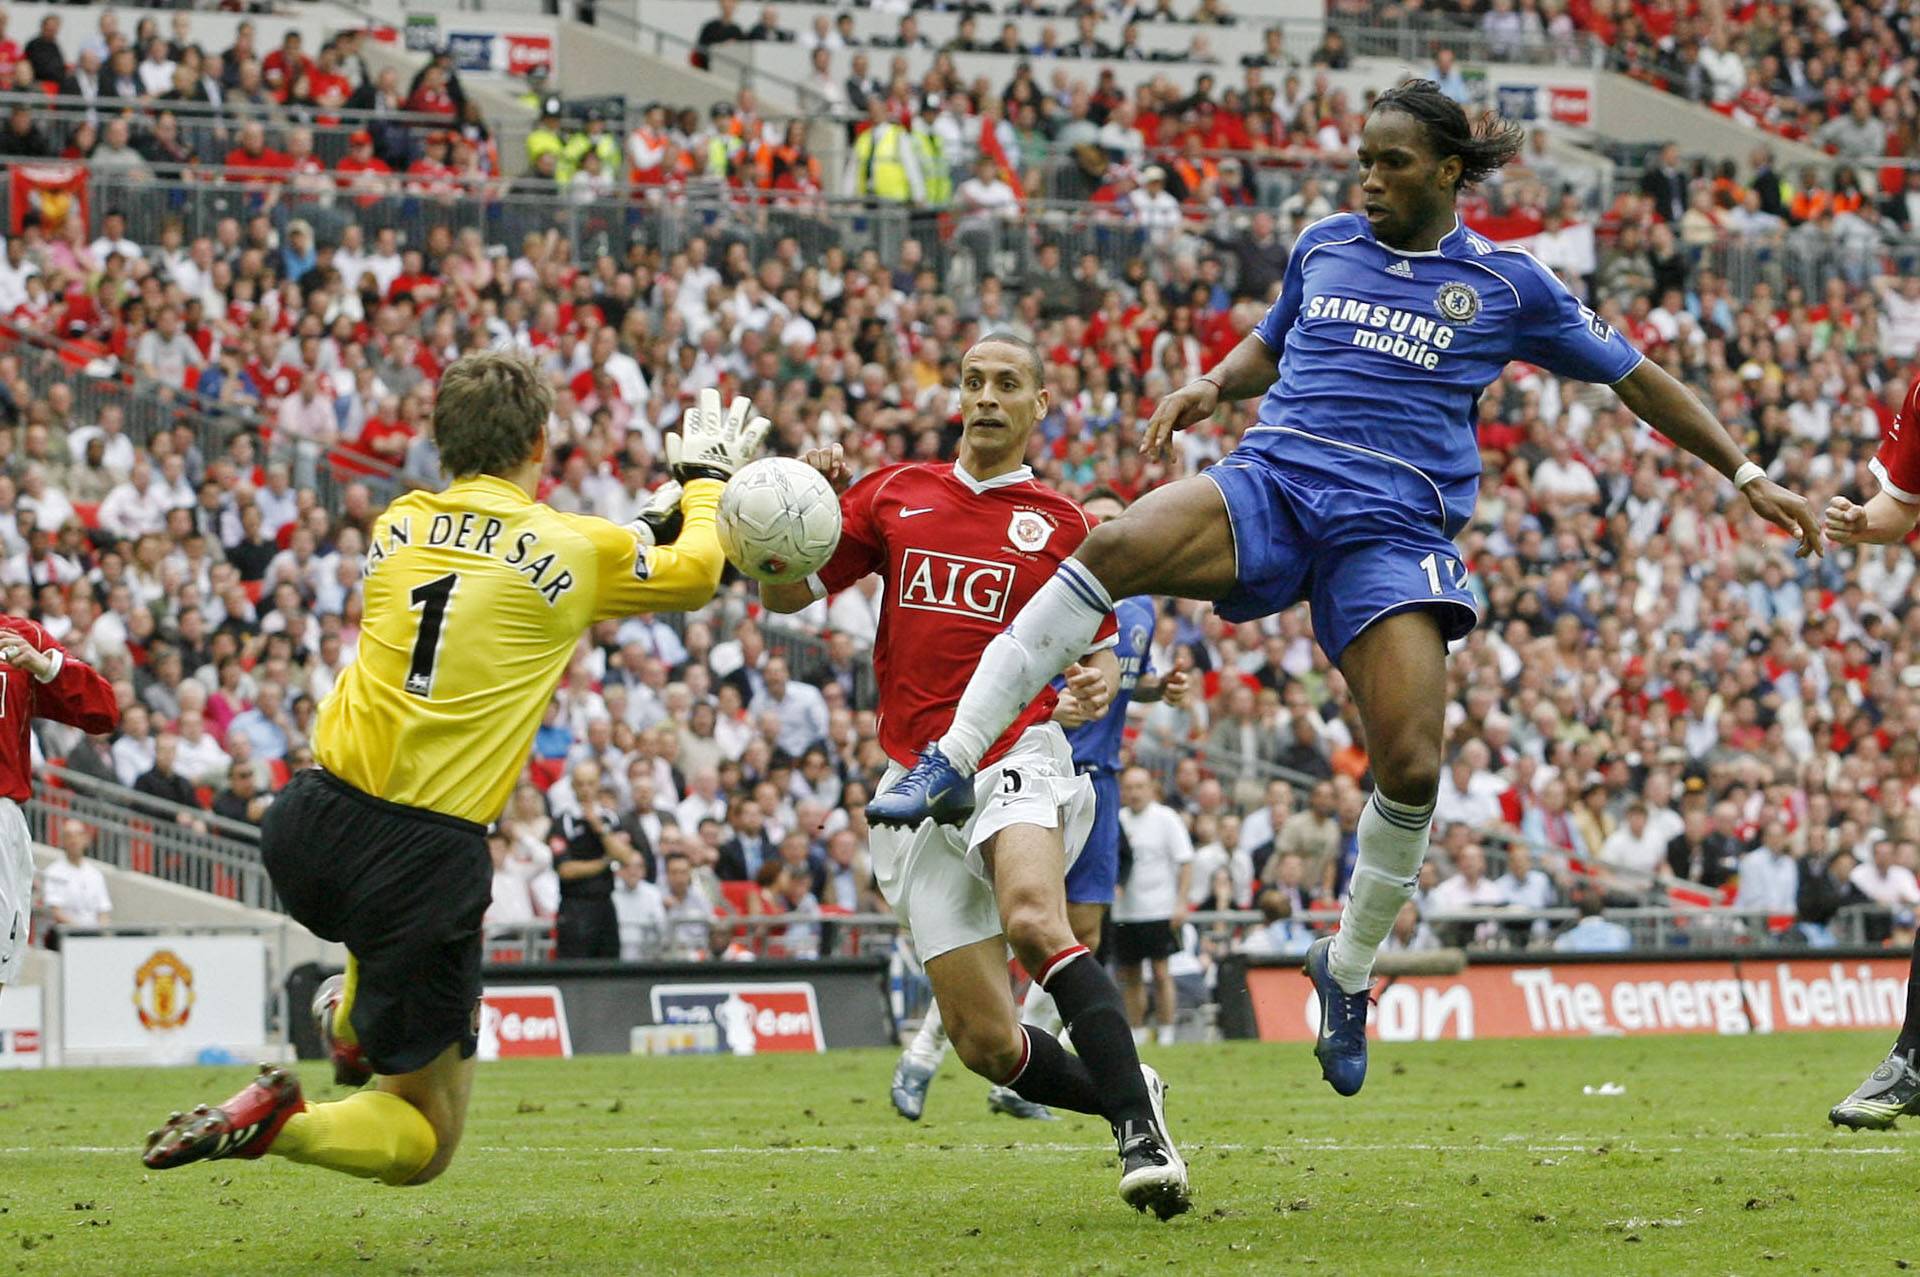 Didier Drogba scored the winning goal in the 2007 FA Cup final